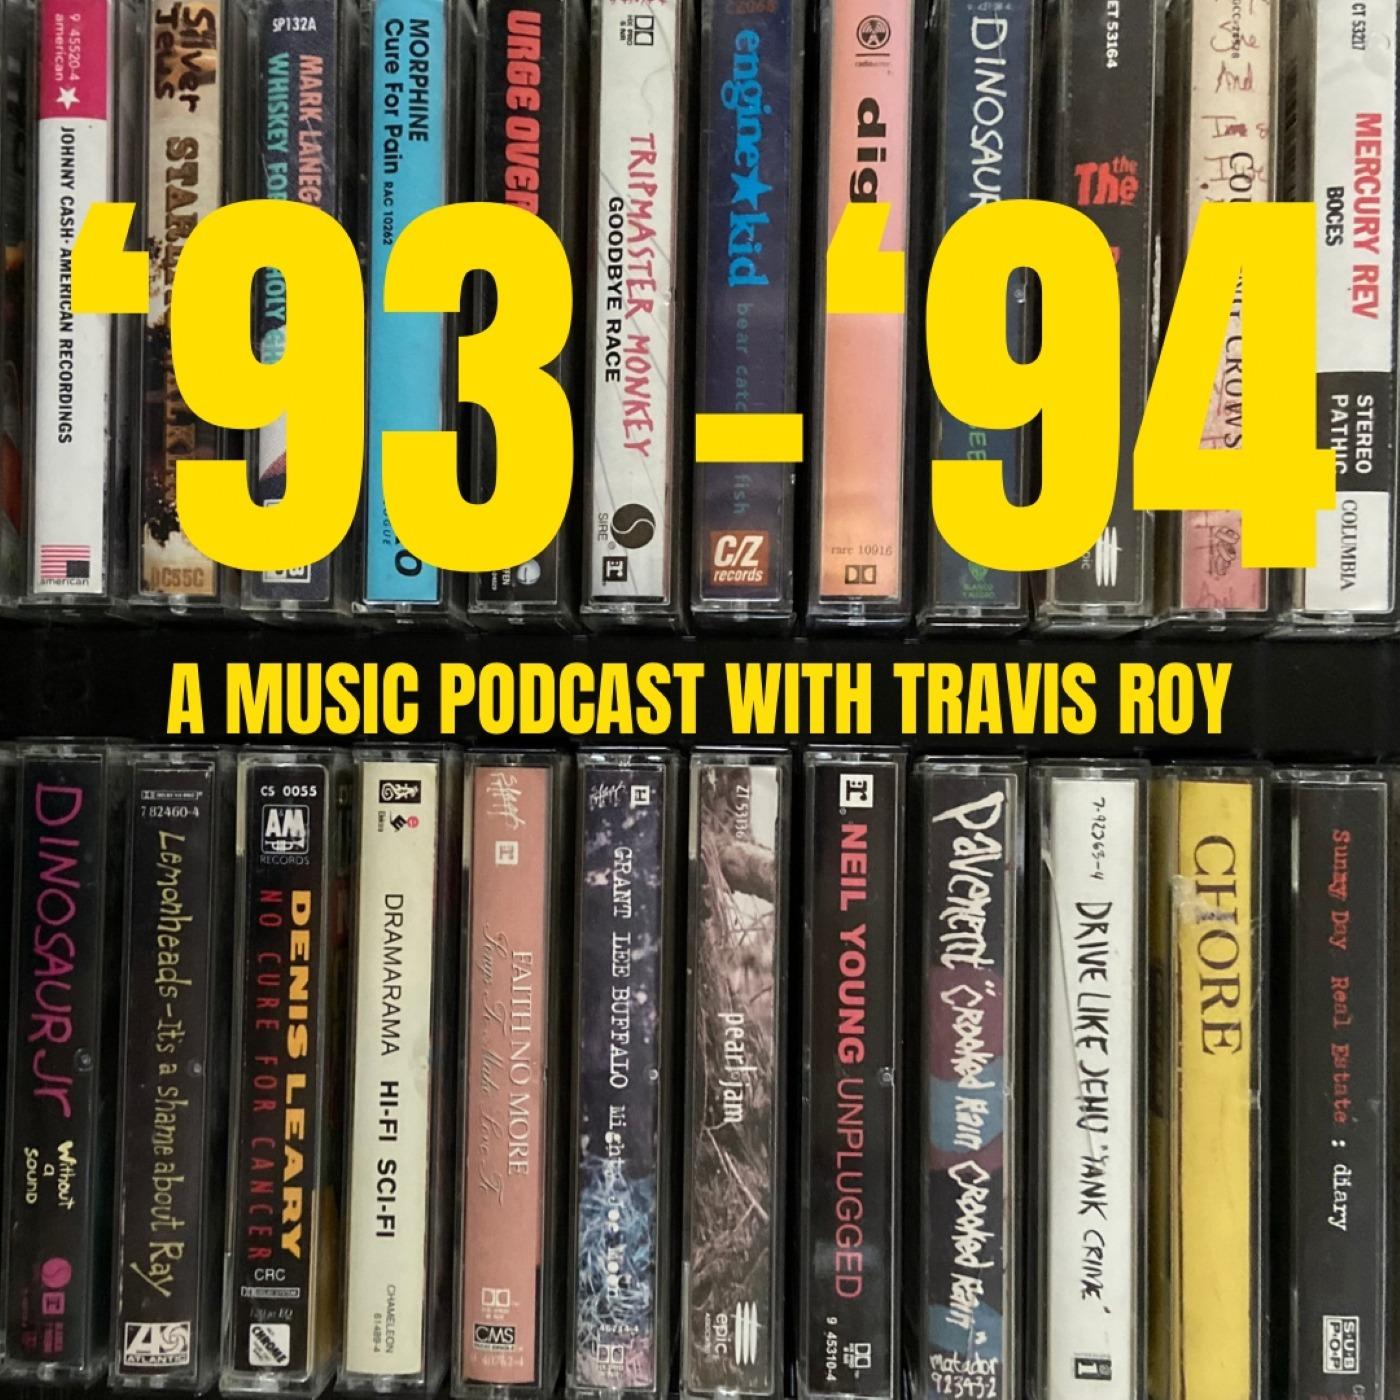 '93 - '94: A Music Podcast